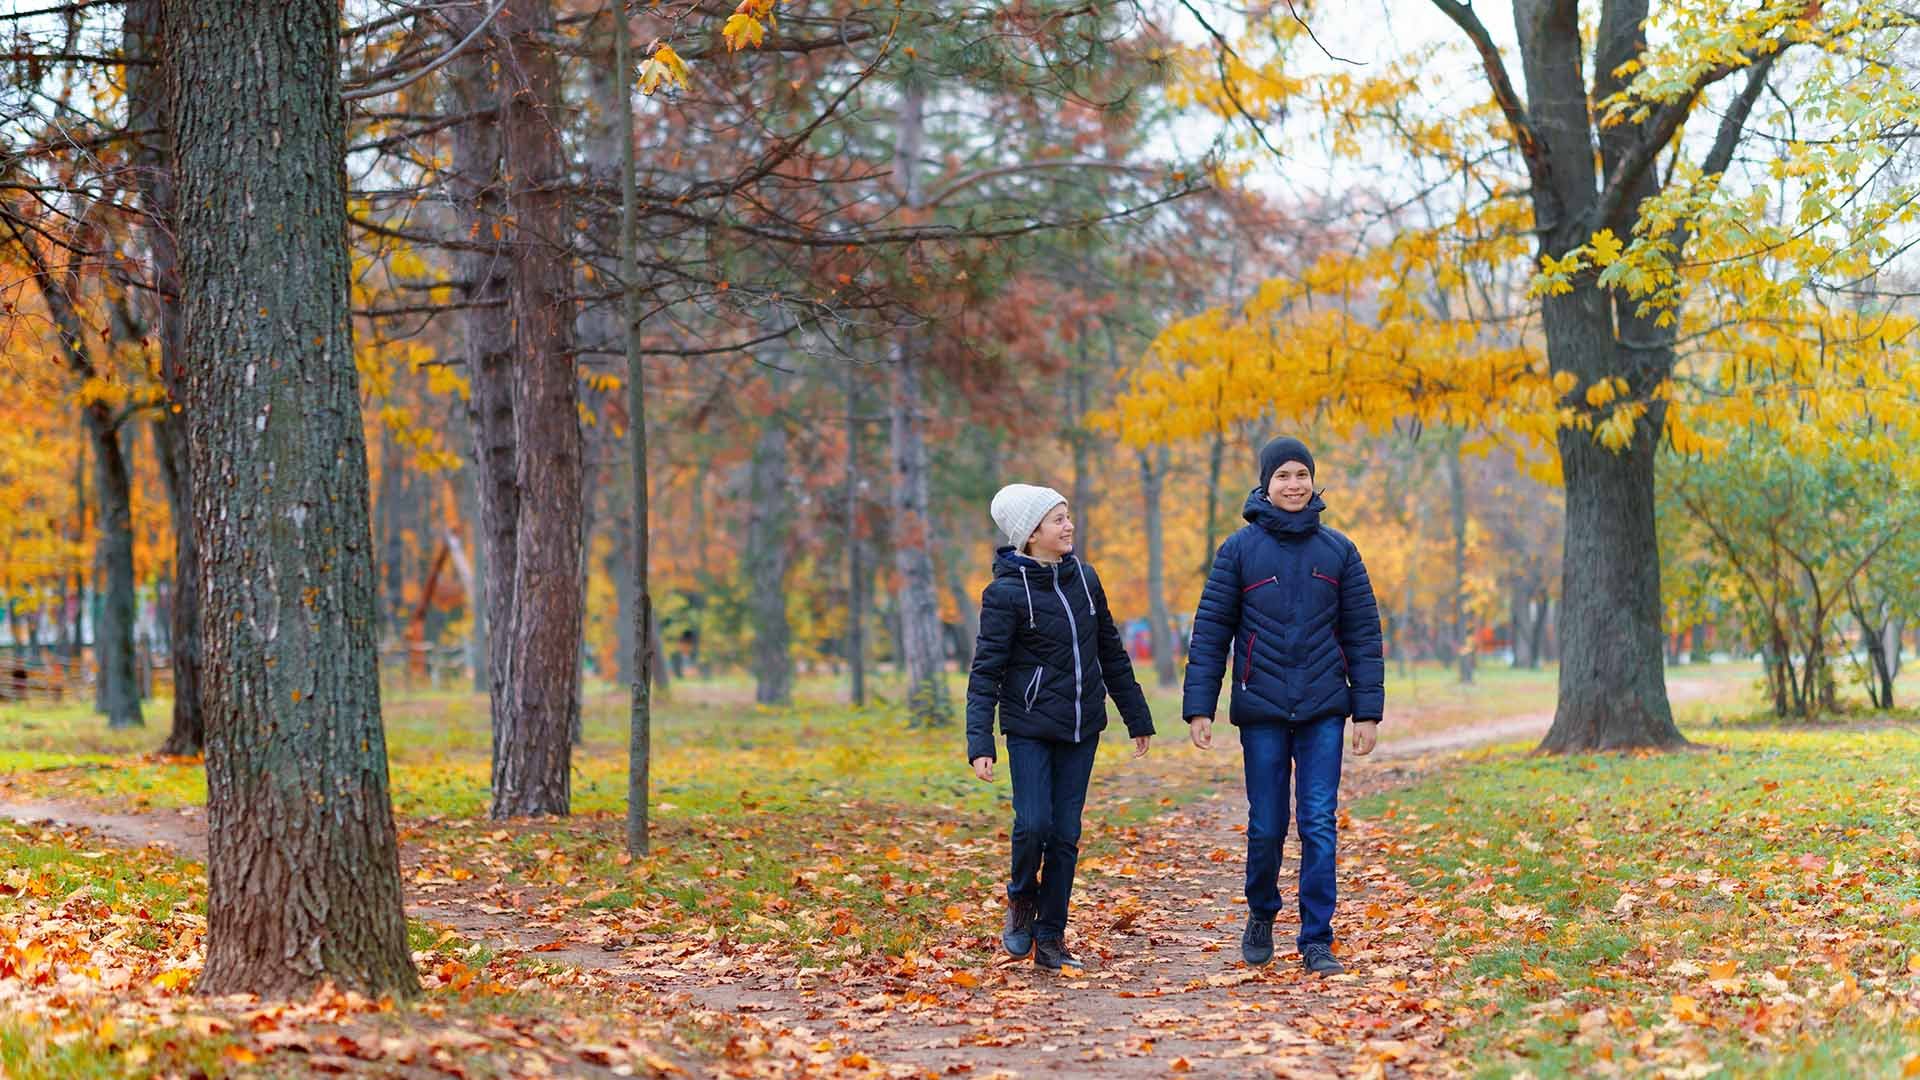 Two people taking a walk in a park.